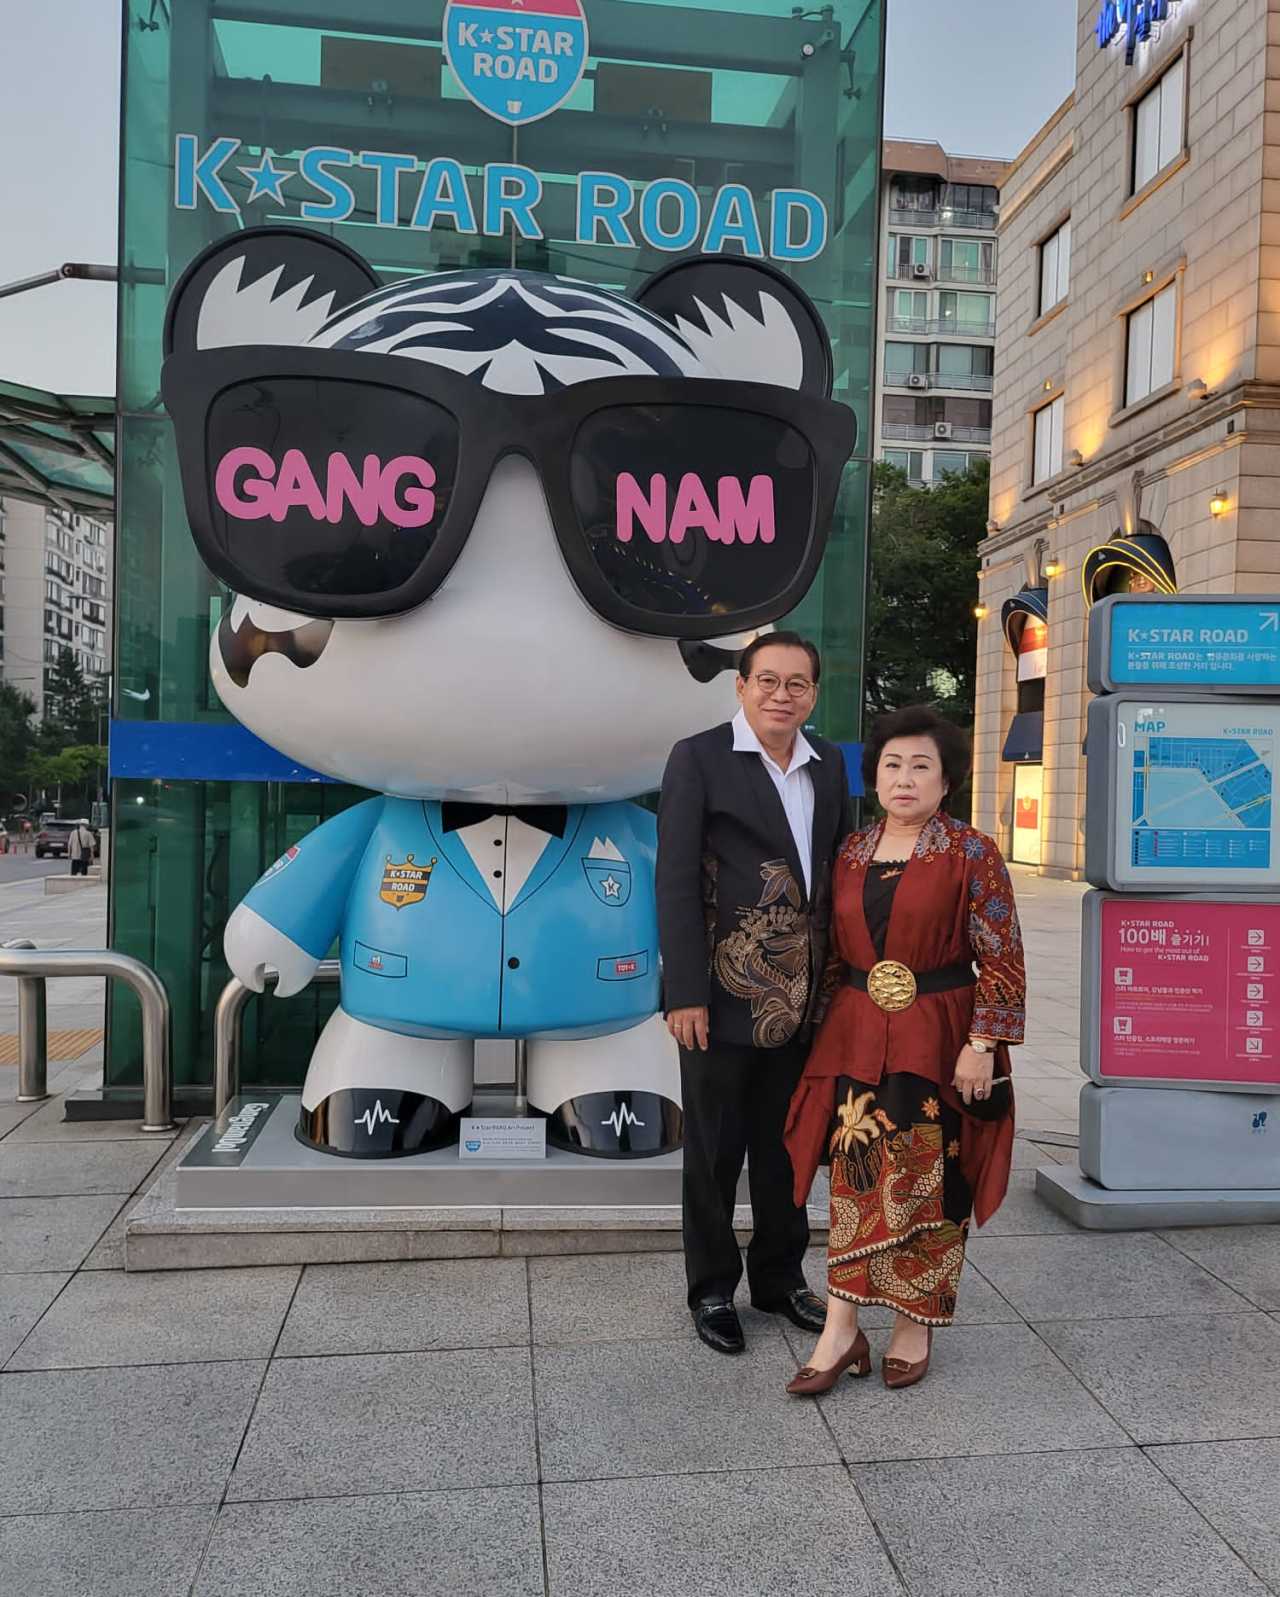 Indonesian Ambassador to Korea Gandi Sulistiyanto and his wife Susi Ardhani Sulistiyanto dressed in Indonesian batik (traditional dyed fabric)pose for a photo in Gangam, Seoul (Indonesian Embassy in Seoul)